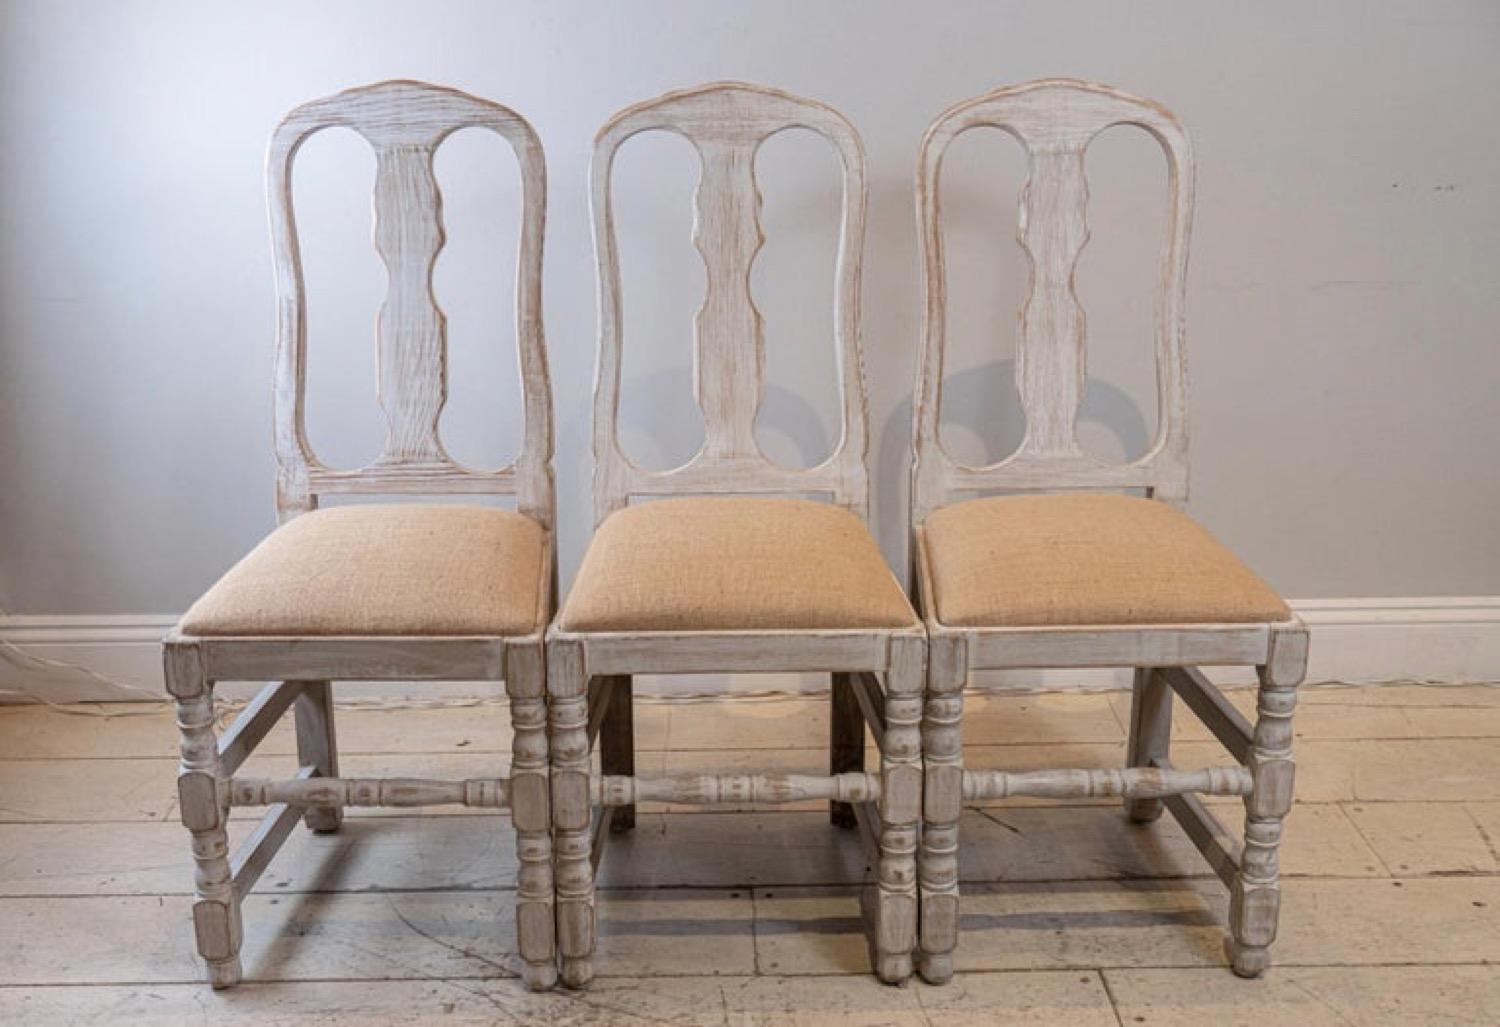 Set of 4 Swedish Folk chairs which feature high-backs and drop-in seats. Upholstered in a neutral sacking fabric. The paintwork has been scraped back and refreshed with a simple white wash.

A wonderful set of chairs which are perfect for a